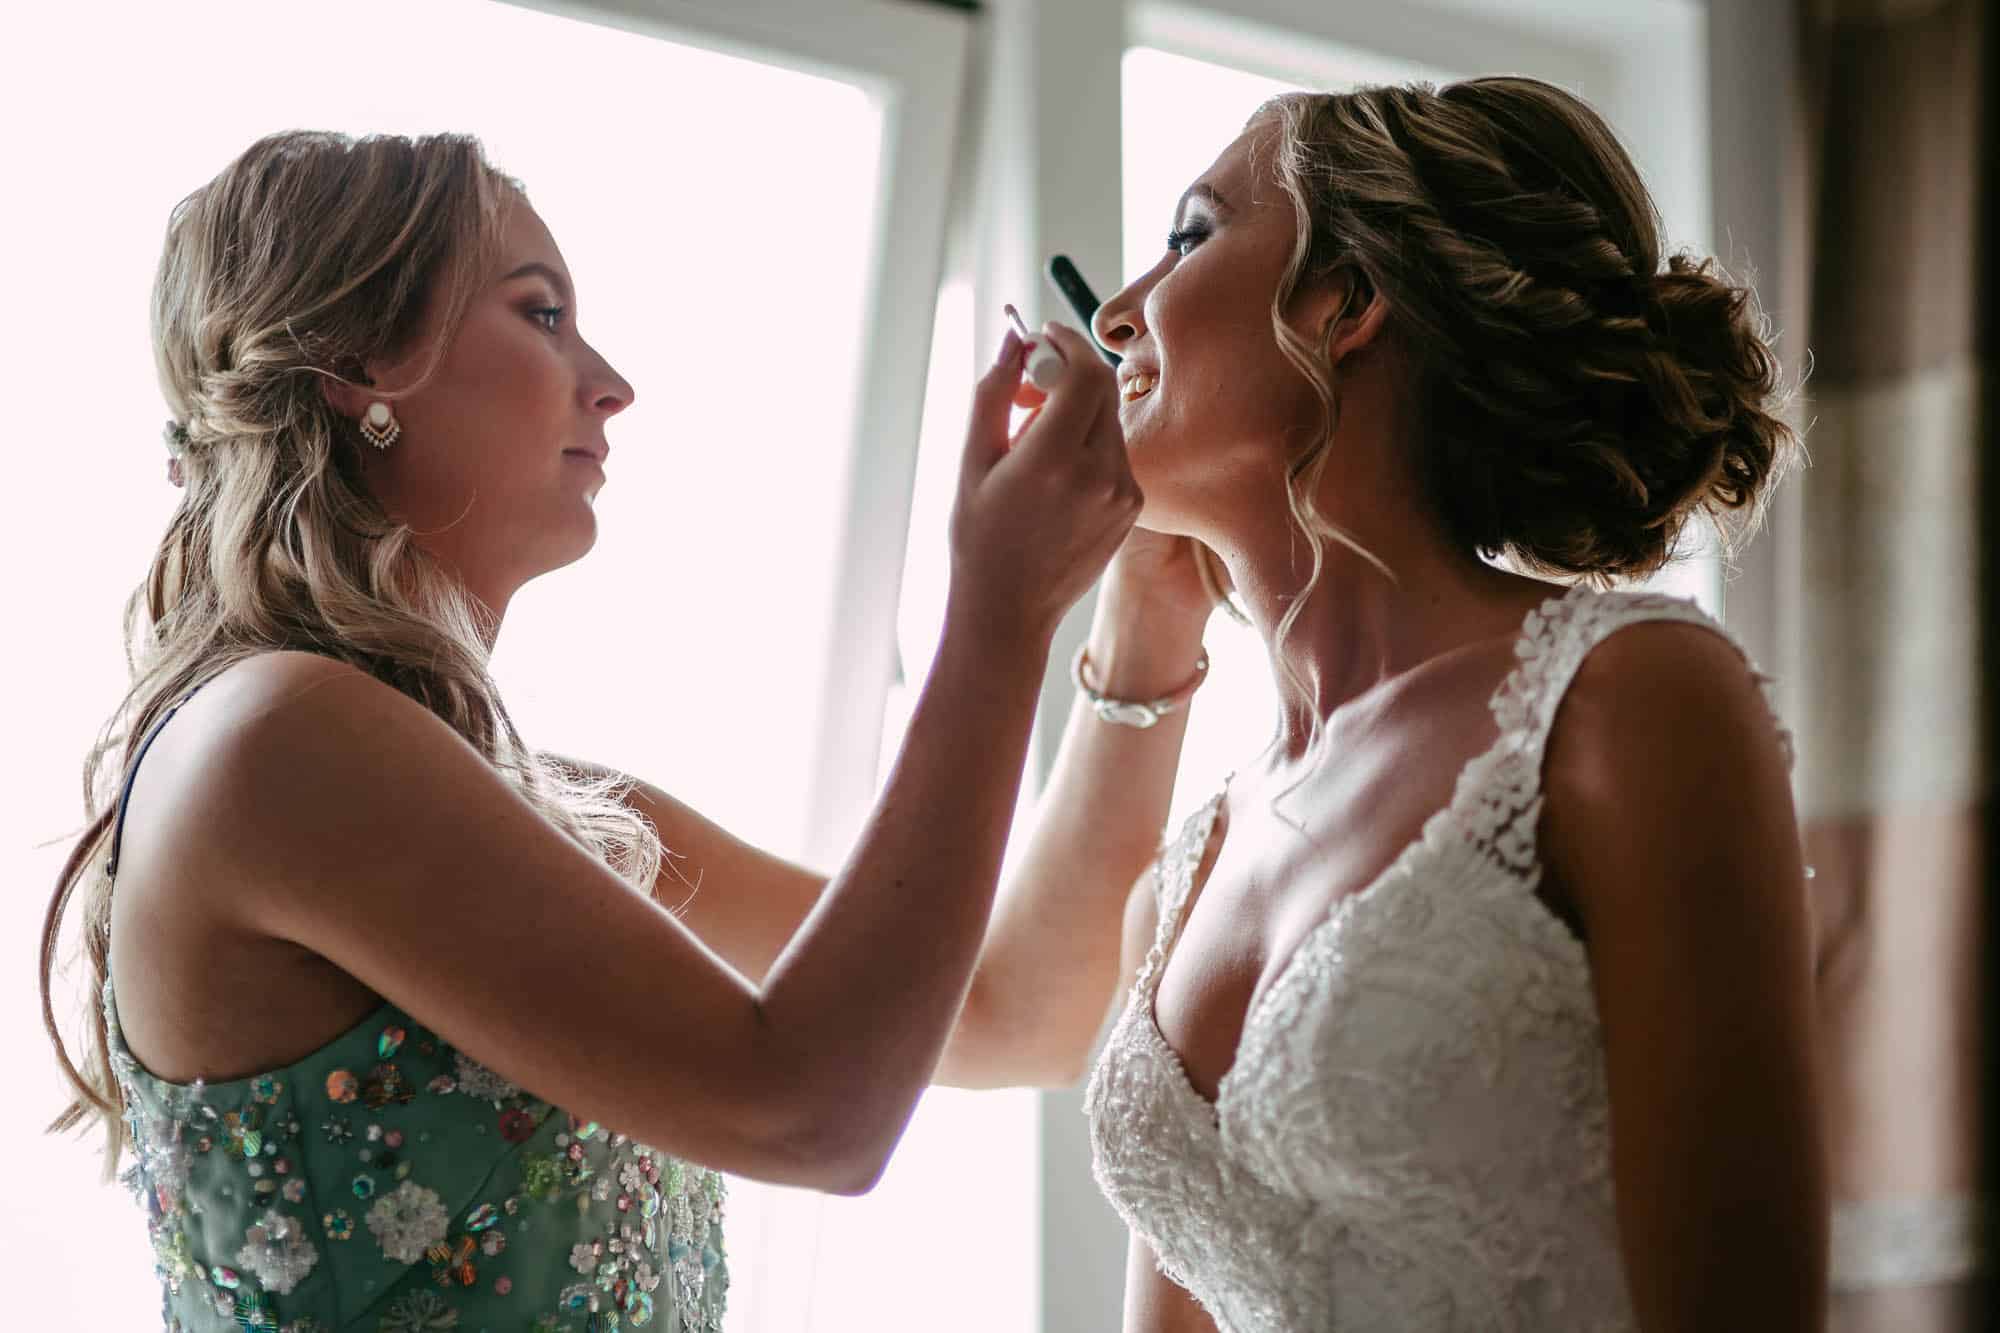 A bridesmaid expertly applies bridal make-up on the bride.